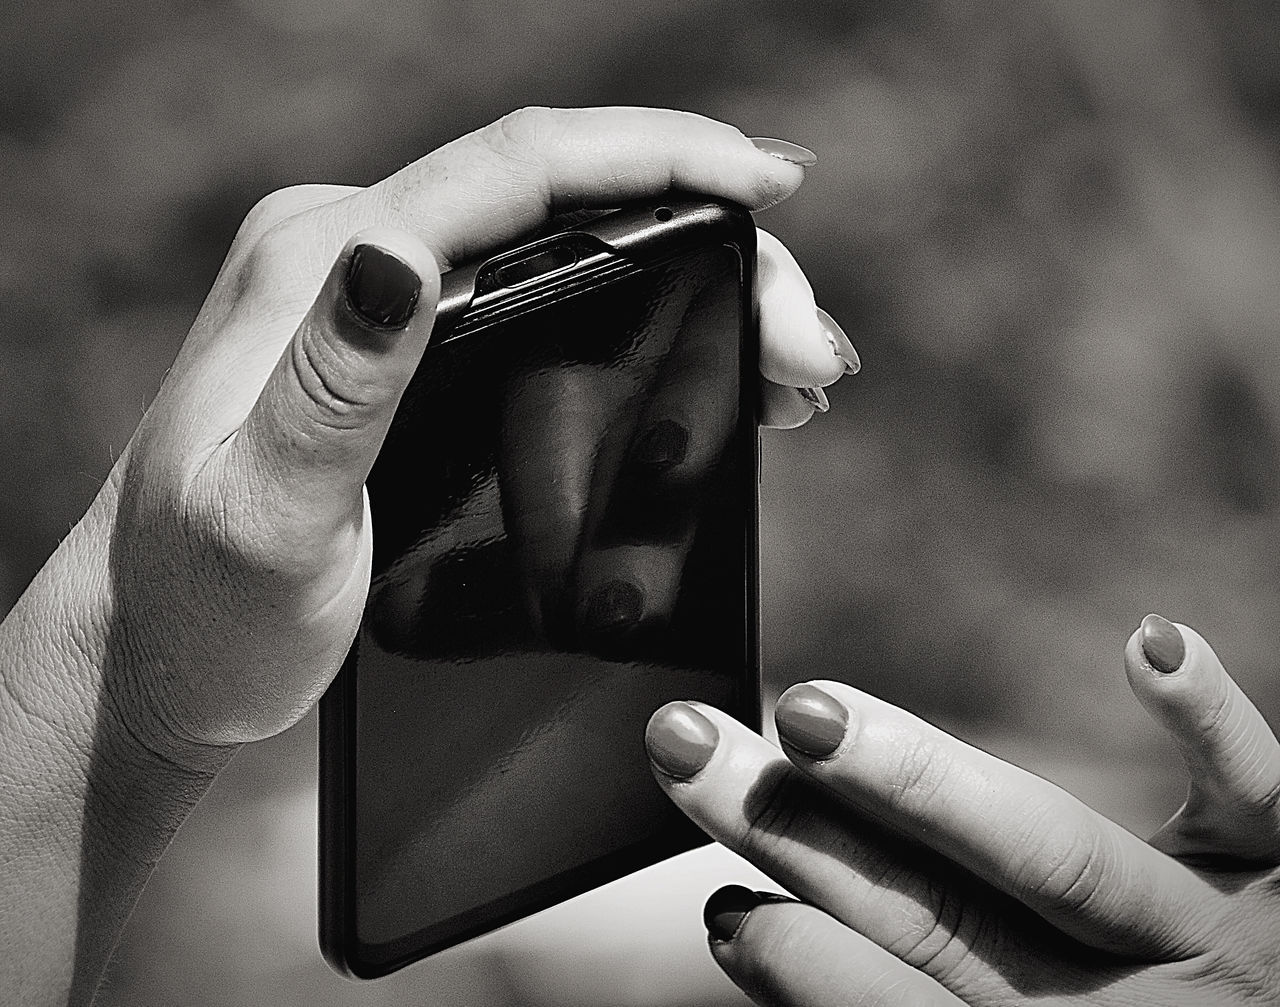 black, hand, white, black and white, monochrome, monochrome photography, holding, technology, close-up, wireless technology, one person, finger, portable information device, smartphone, communication, adult, mobile phone, focus on foreground, activity, lifestyles, women